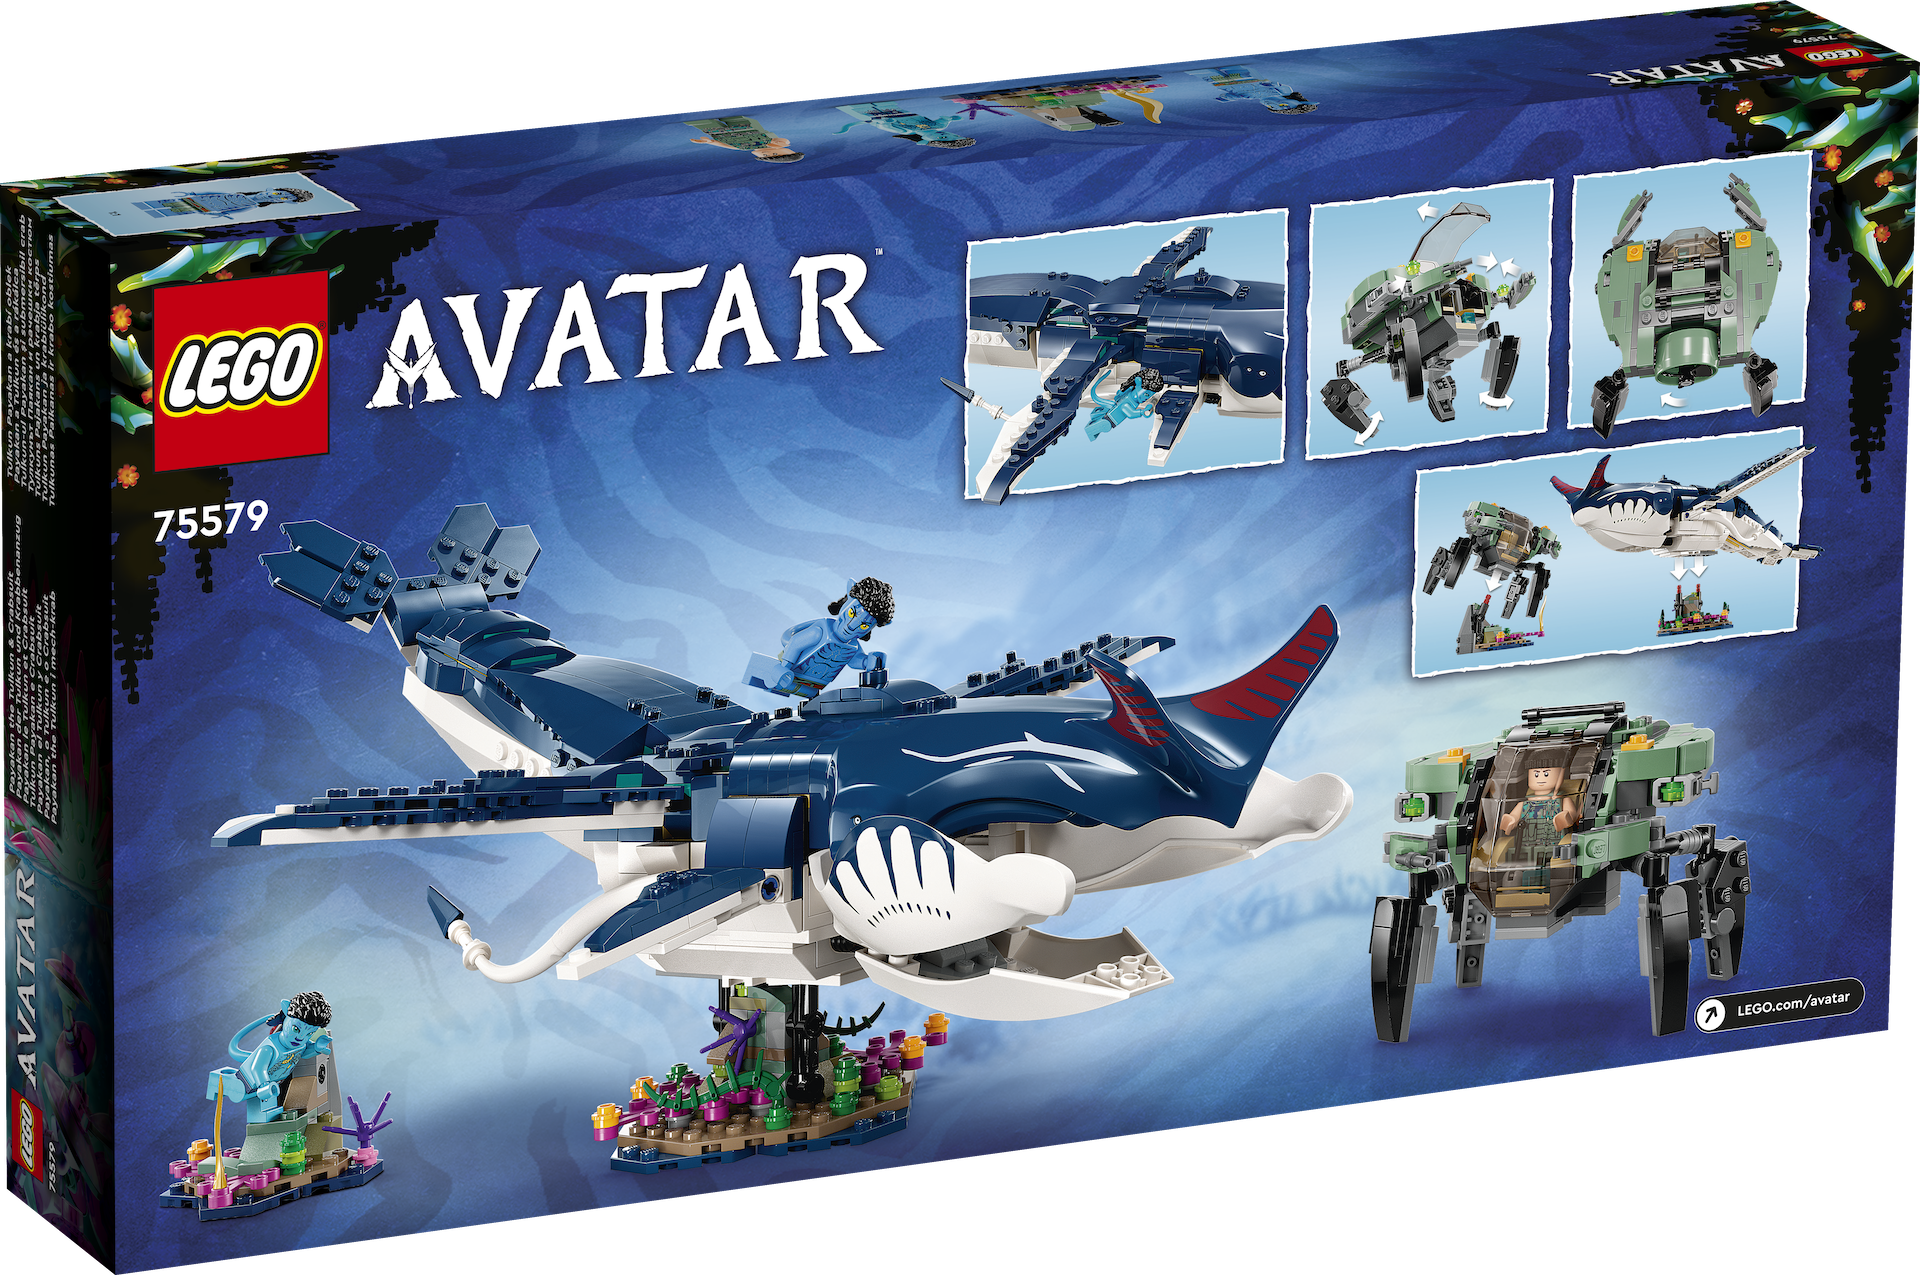 First Look at 'Avatar's LEGO Set Ahead of 'The Way of the Water's